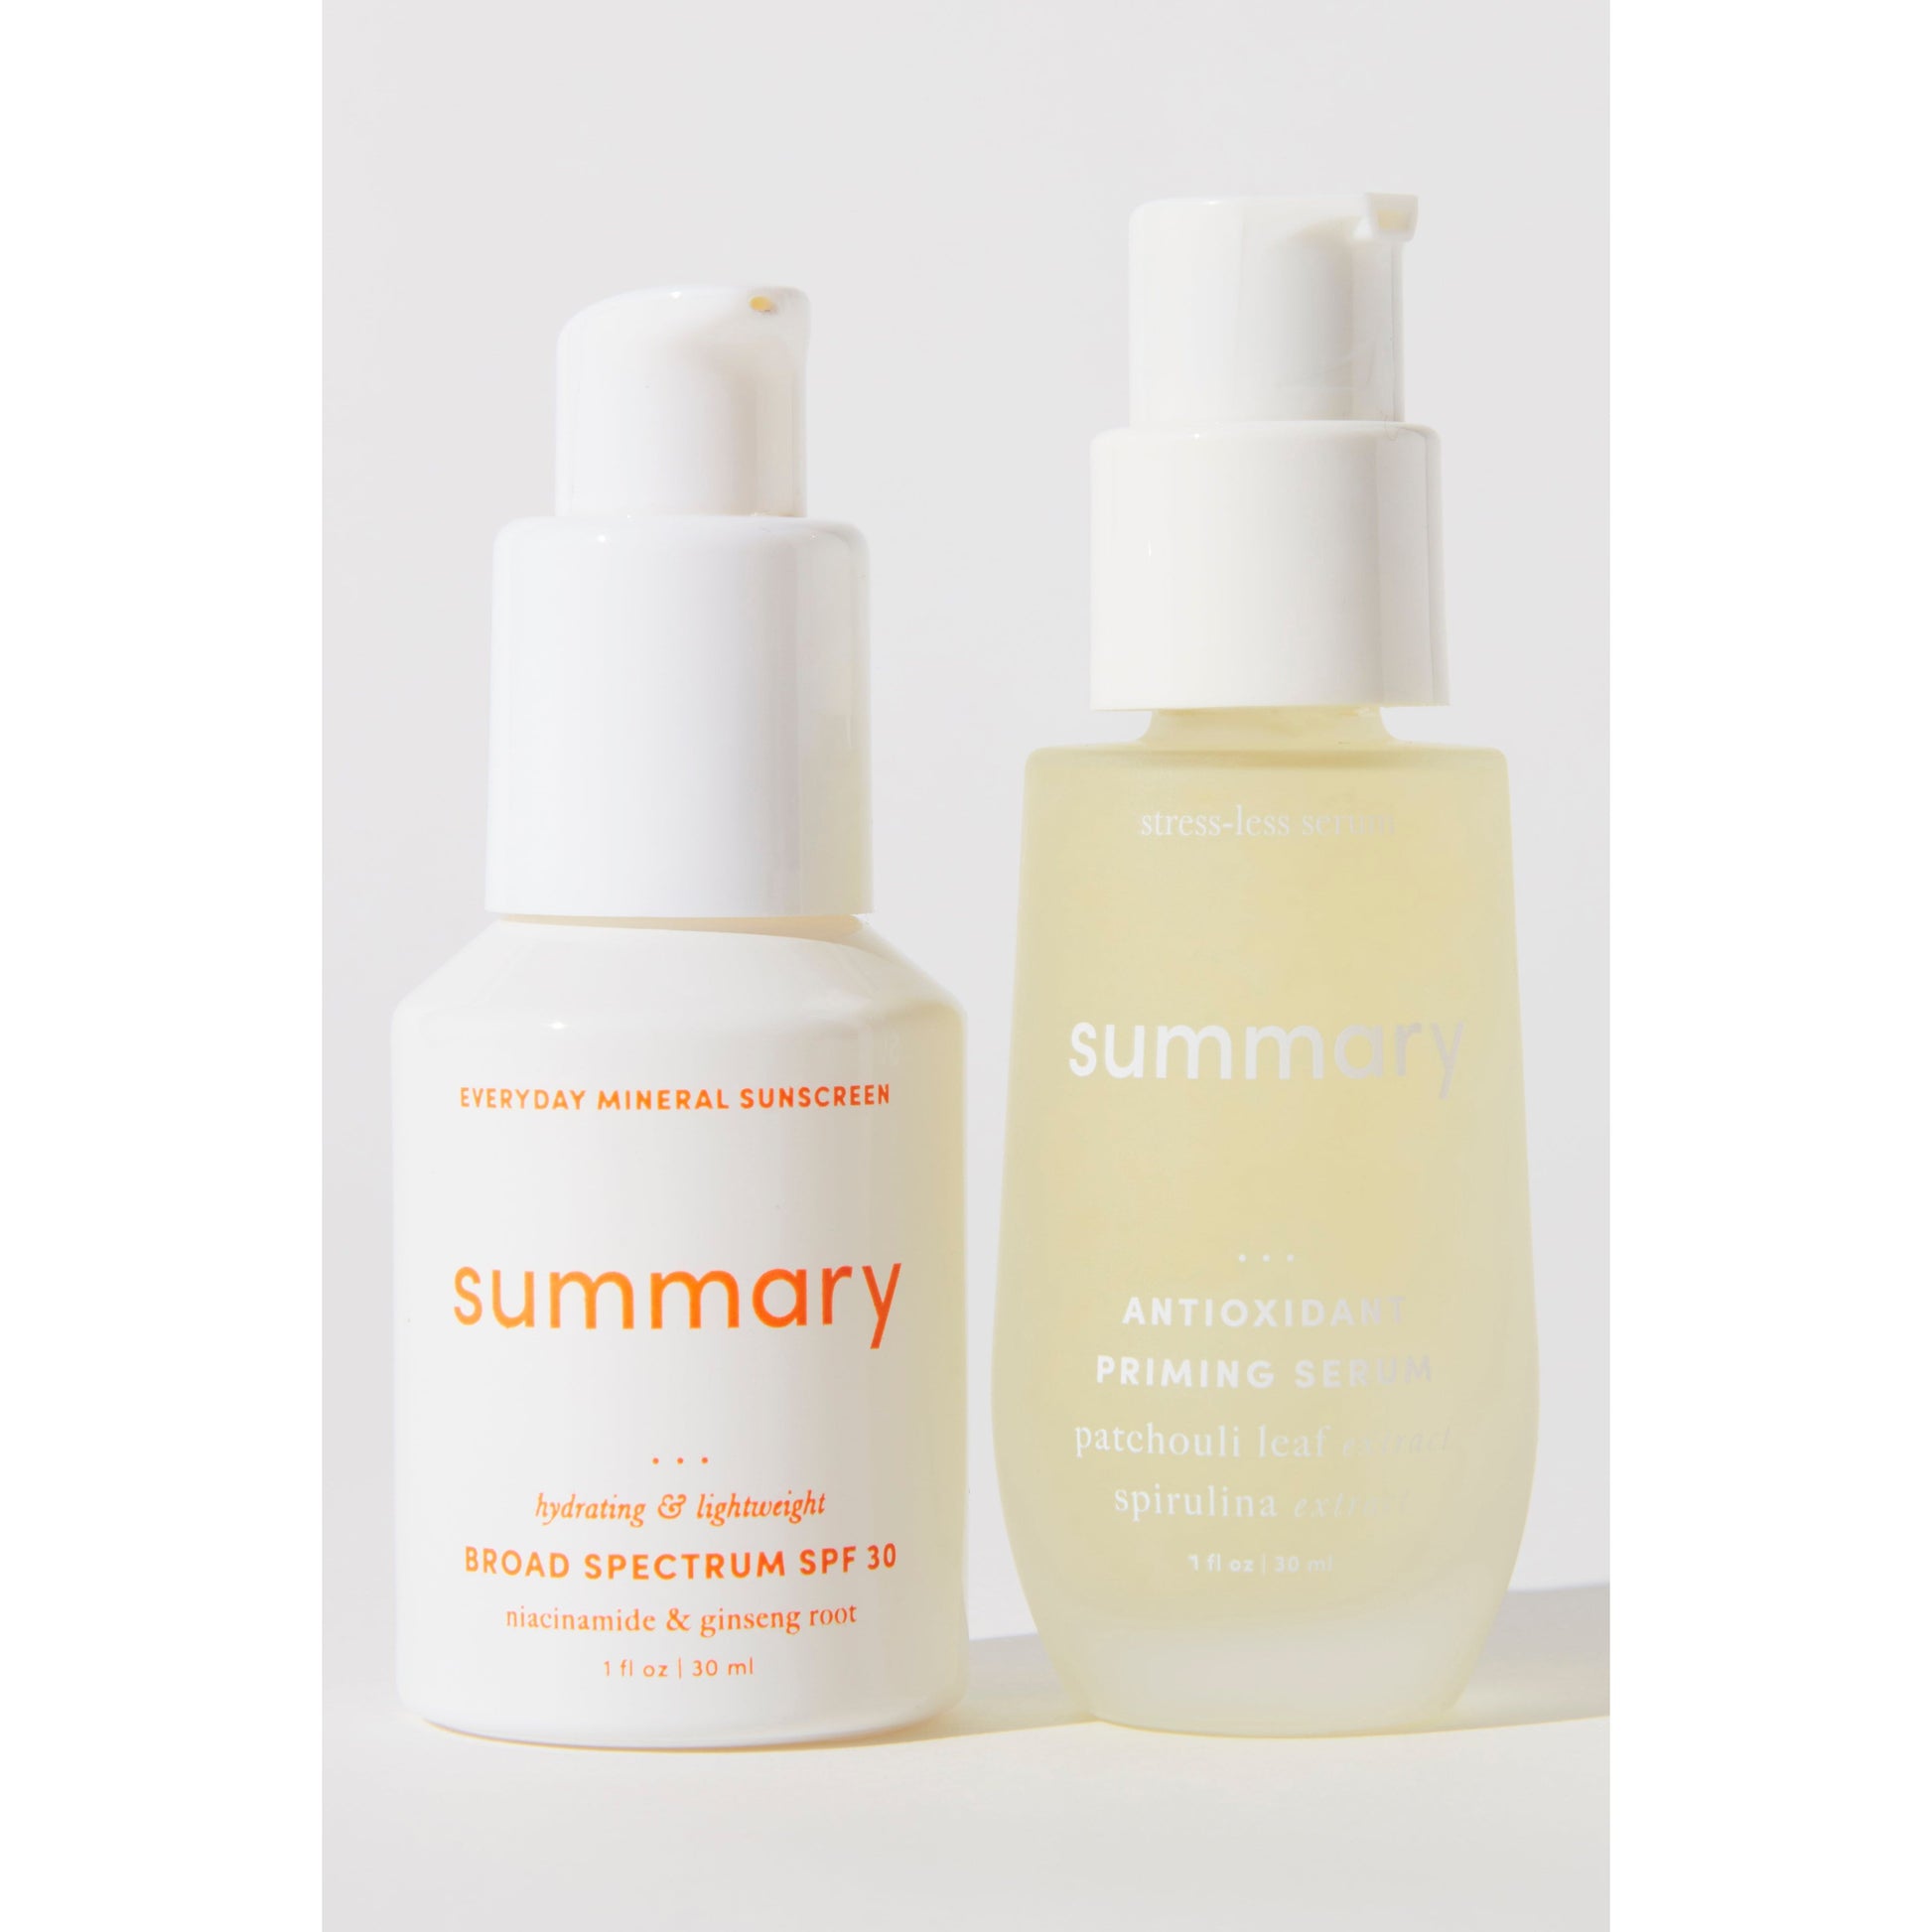 Two skincare bottles labeled "Summary SPF 30," one a mineral-based sunscreen and the other an antioxidant serum, against a white background.